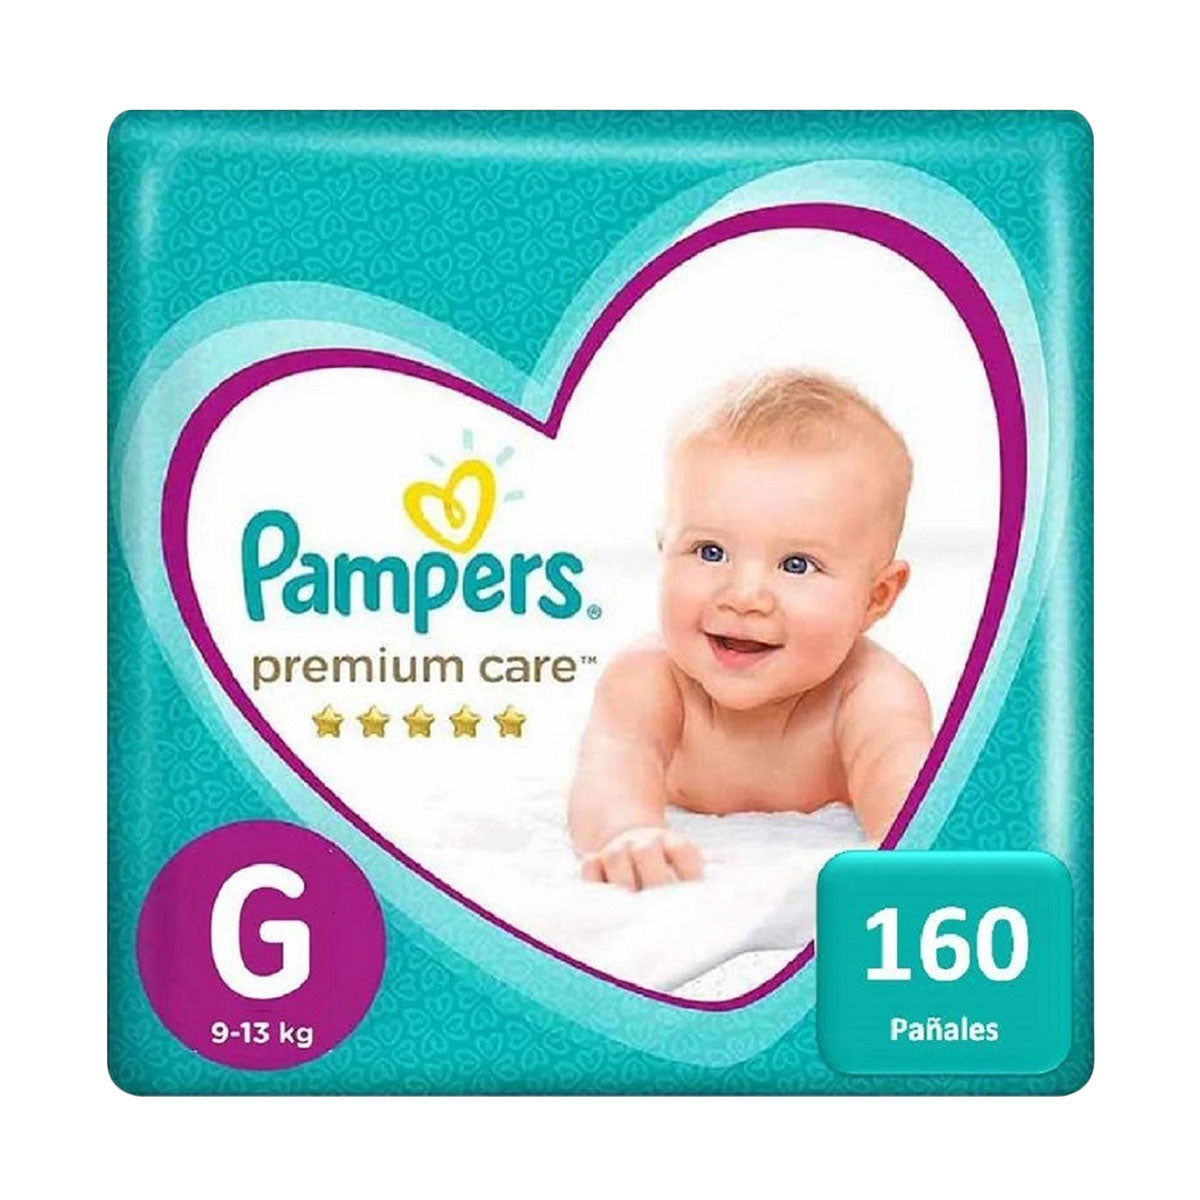 Pañales Pampers Premium Care G (160 unidades)